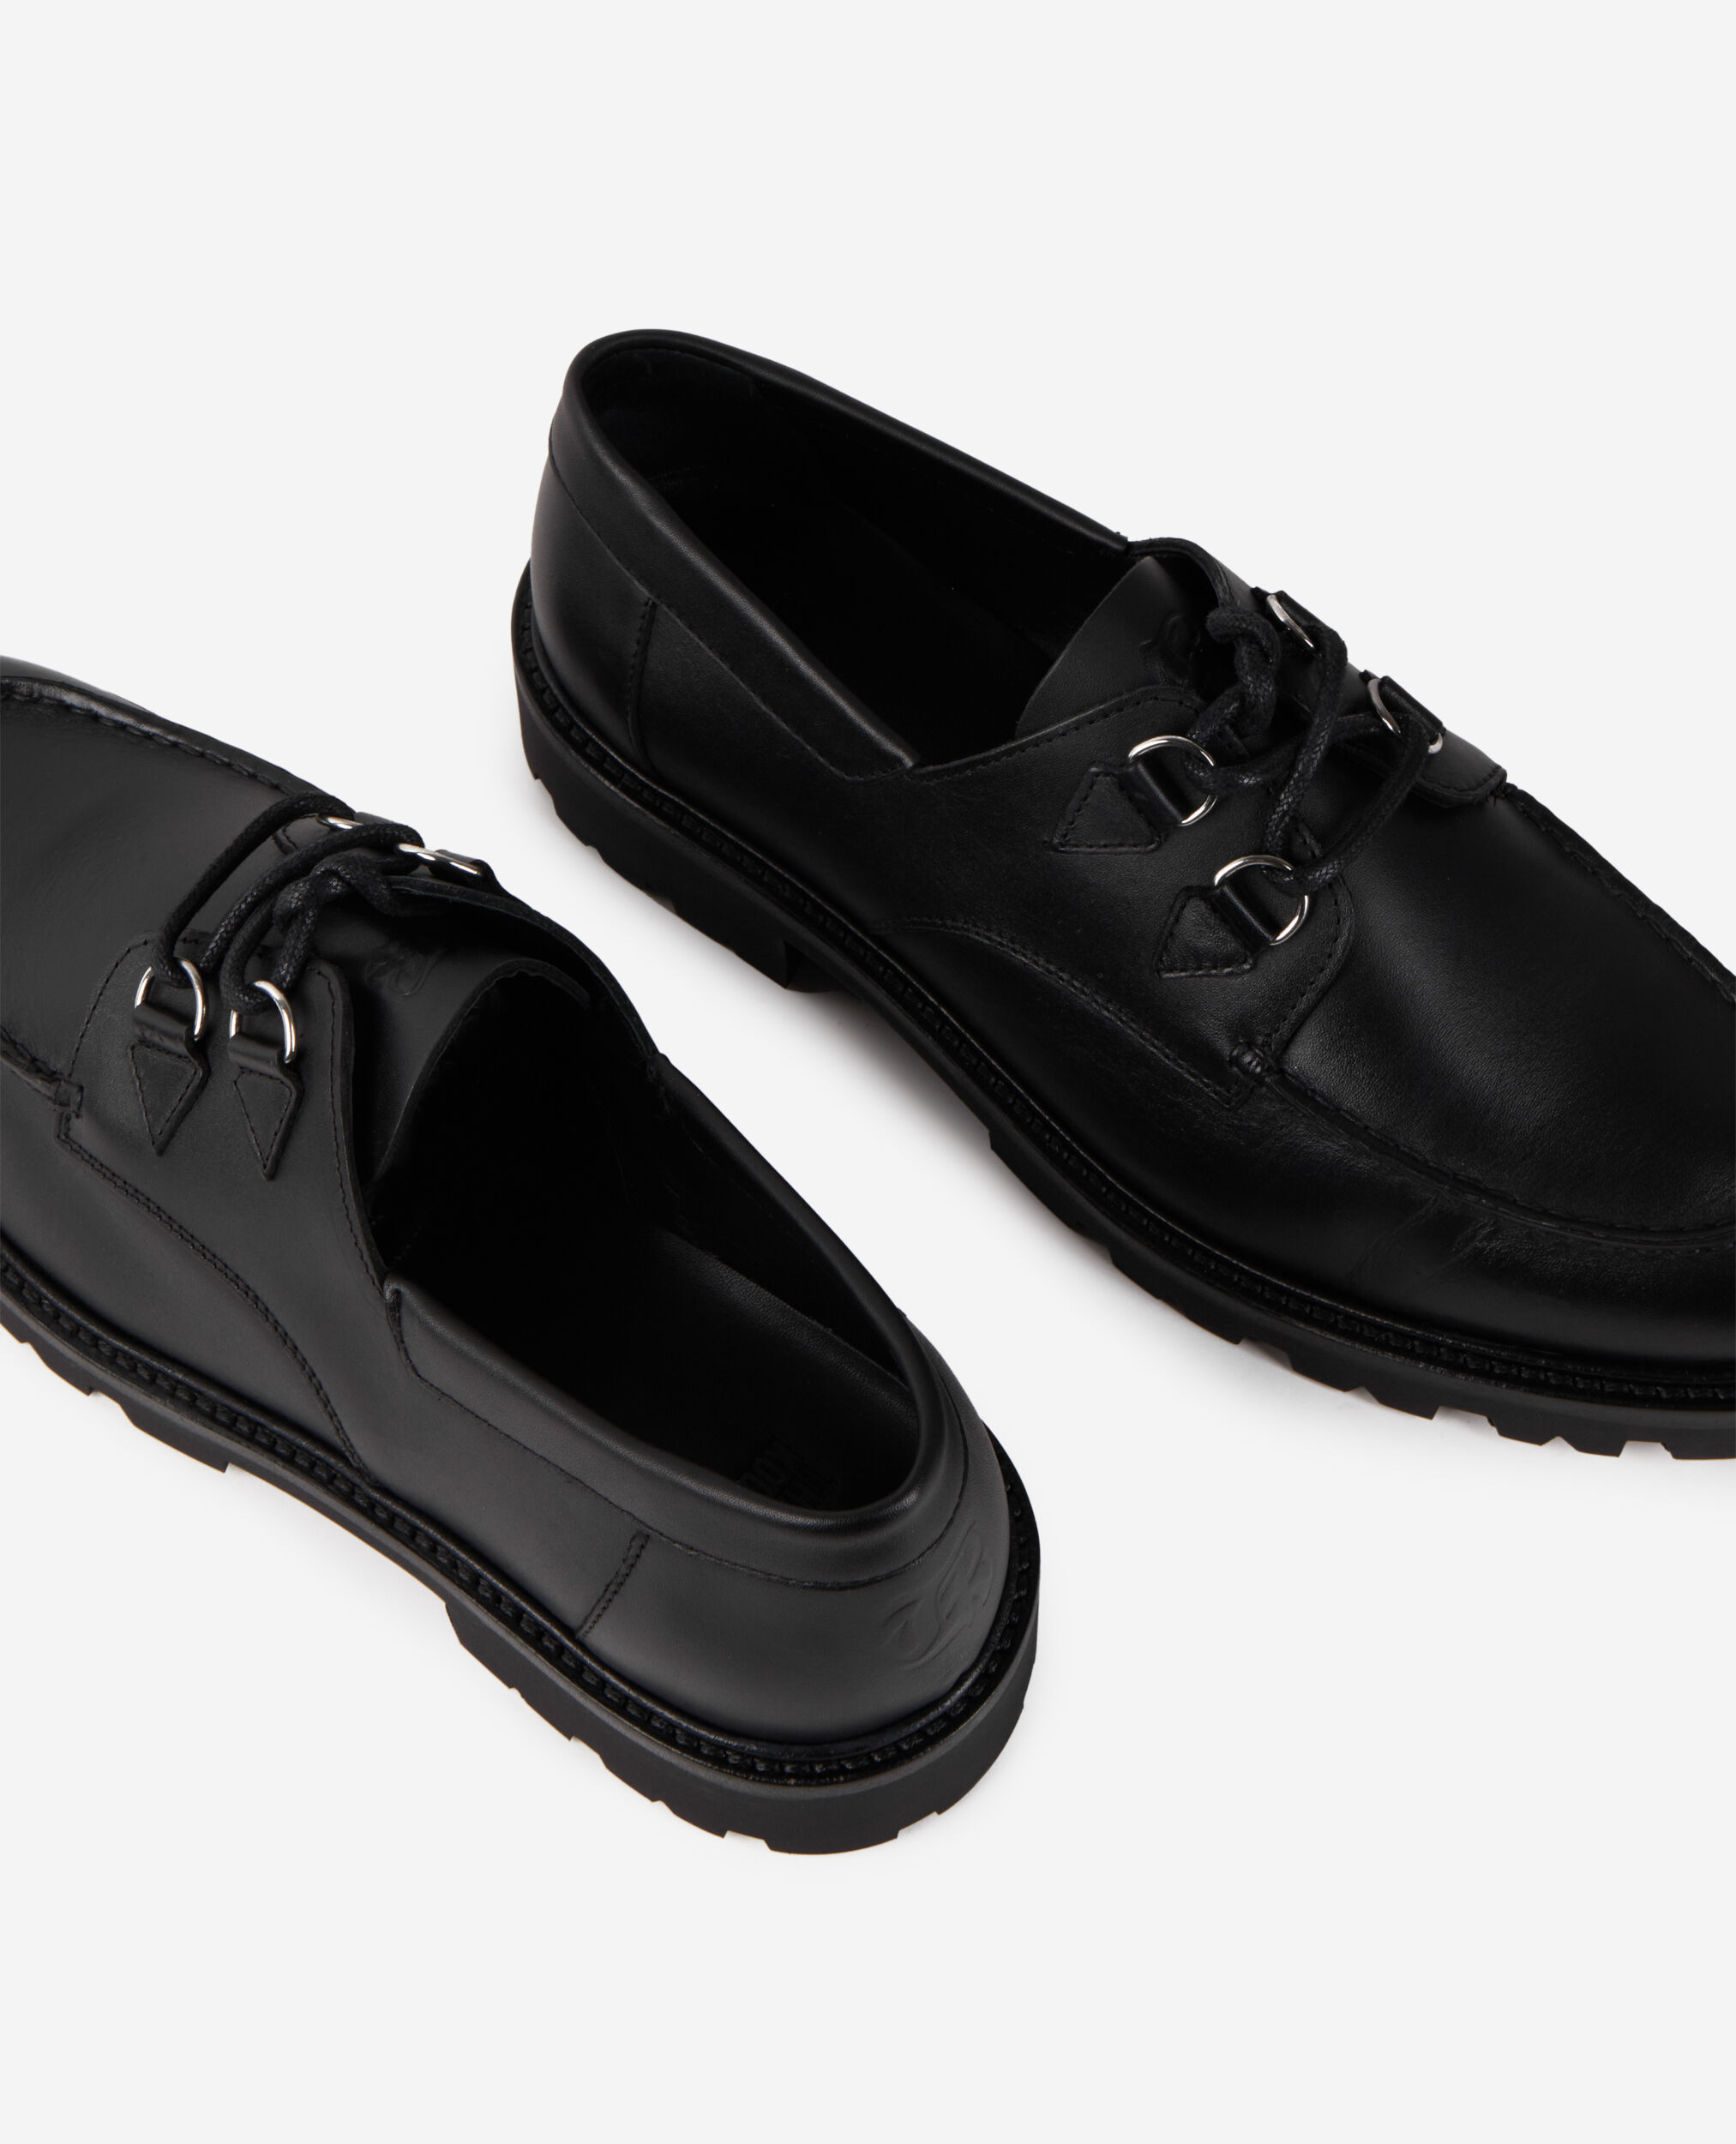 Black leather derbies with laces, BLACK, hi-res image number null